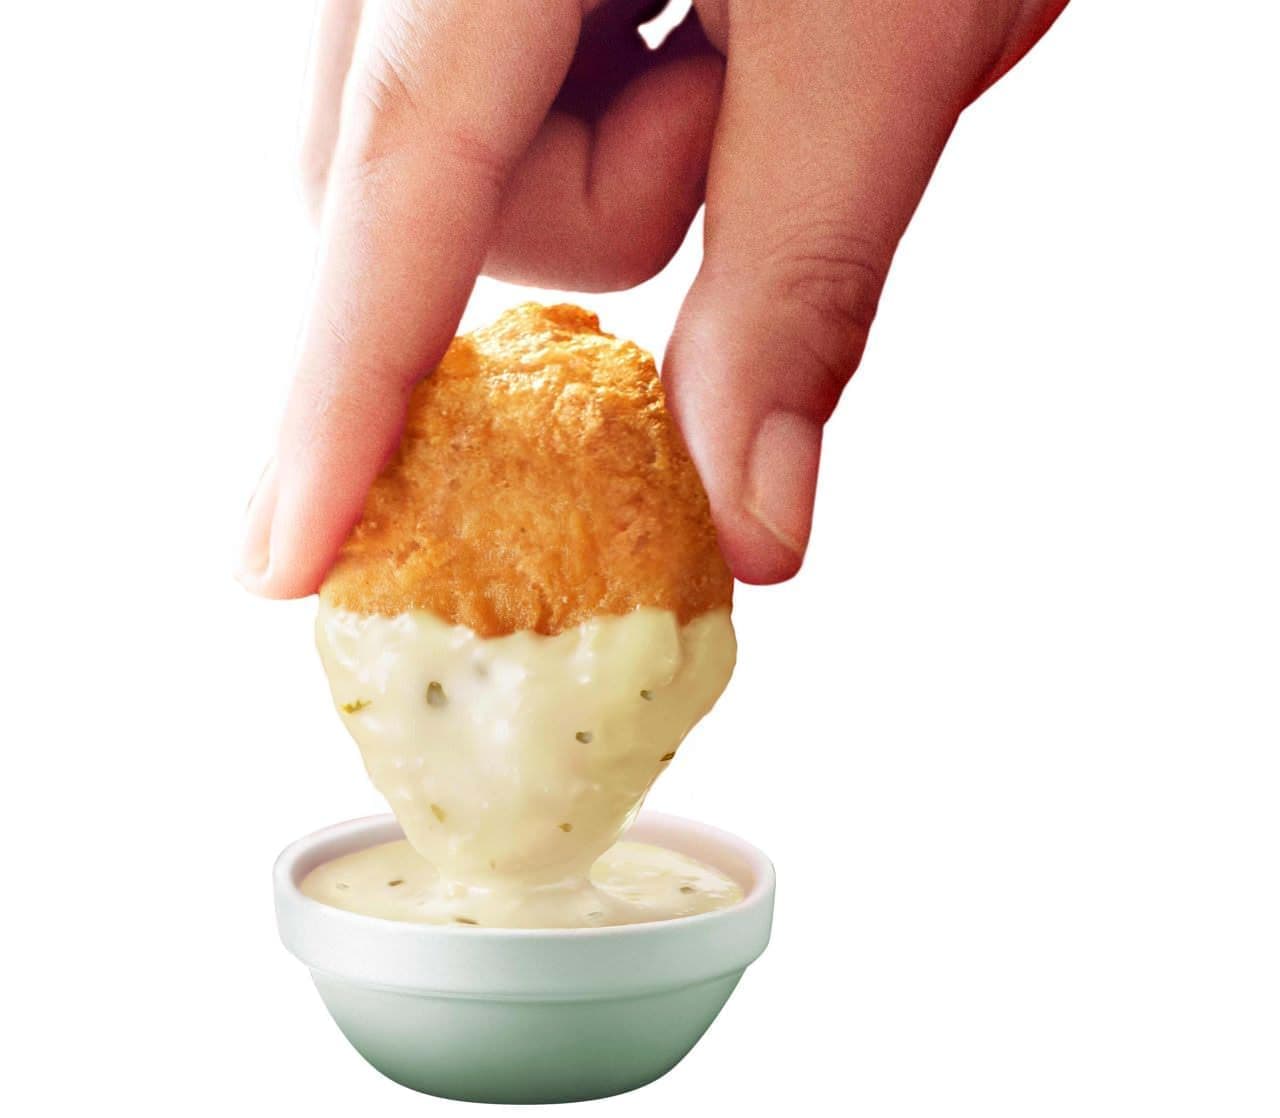 "Sour cream onion sauce" from McDonald's "Chicken McNugget"